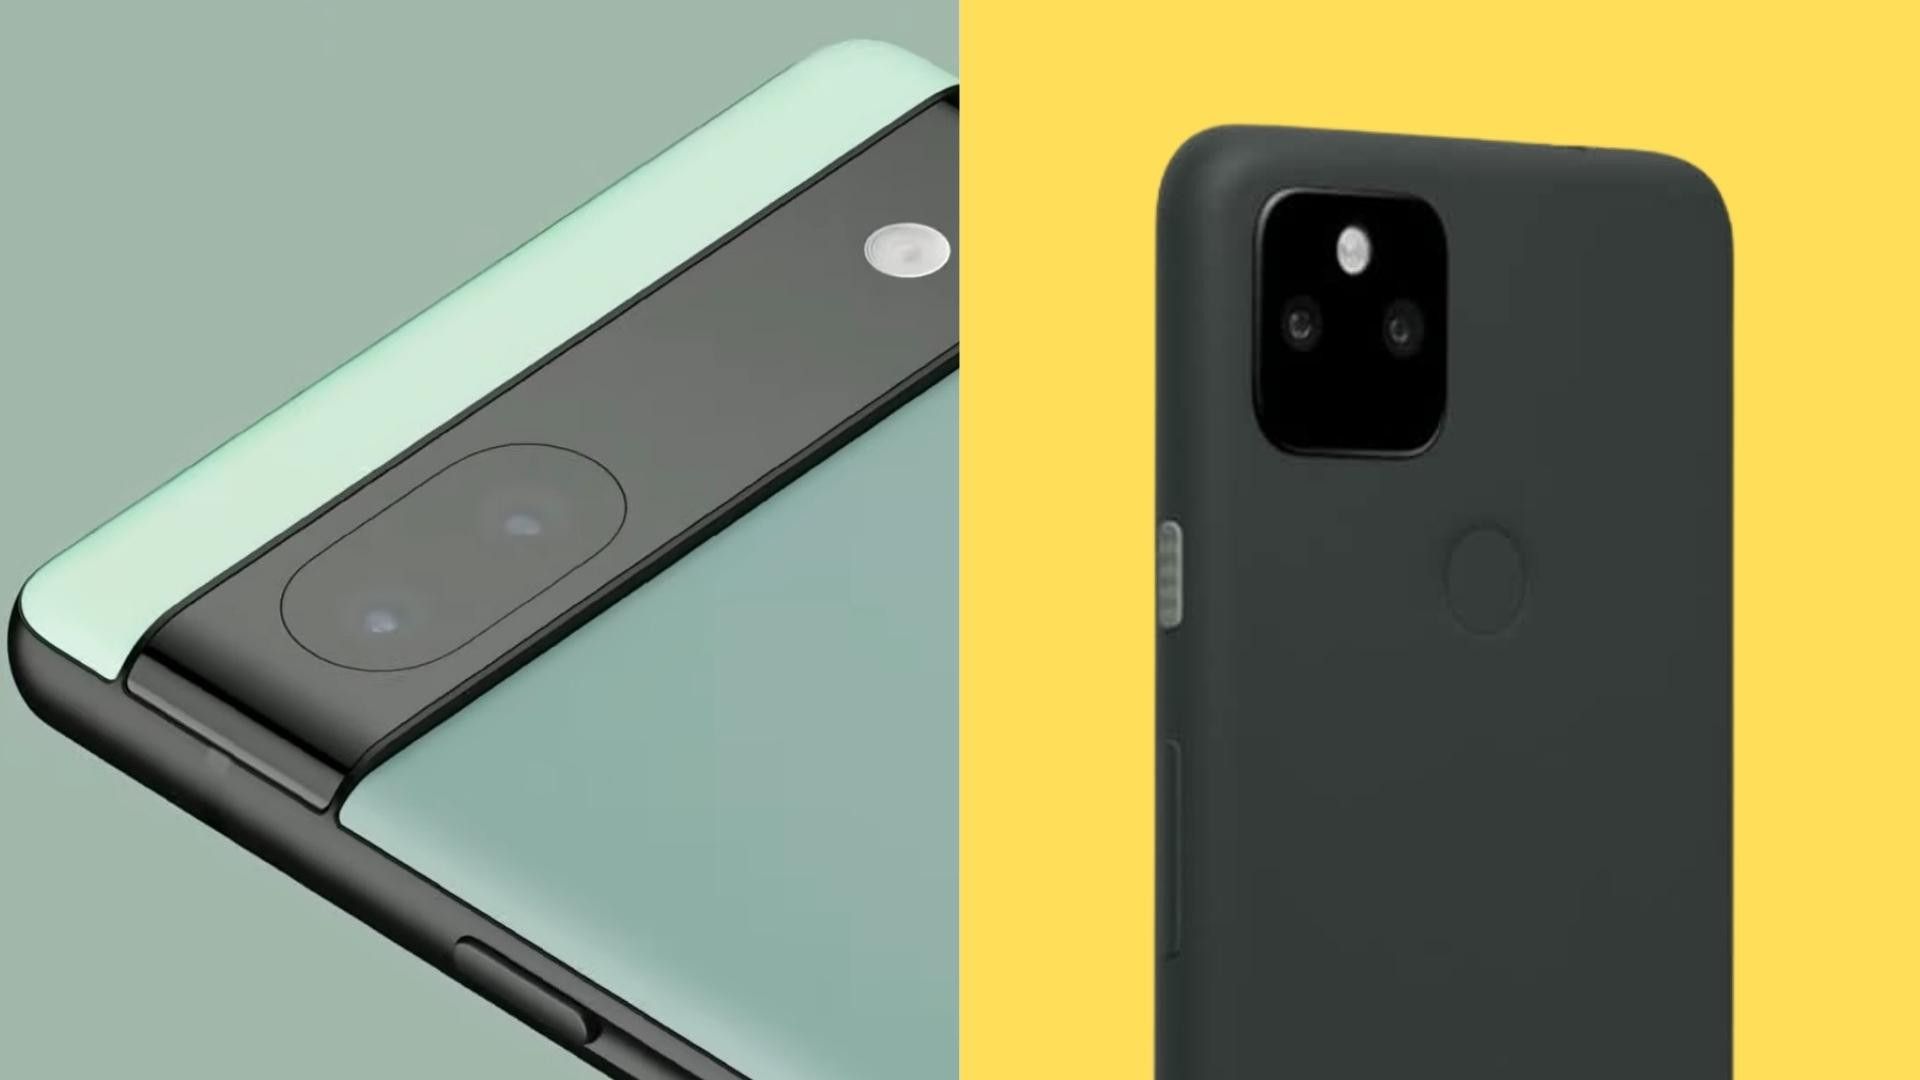 Google Pixel 6a vs Pixel 5a: What's new and different